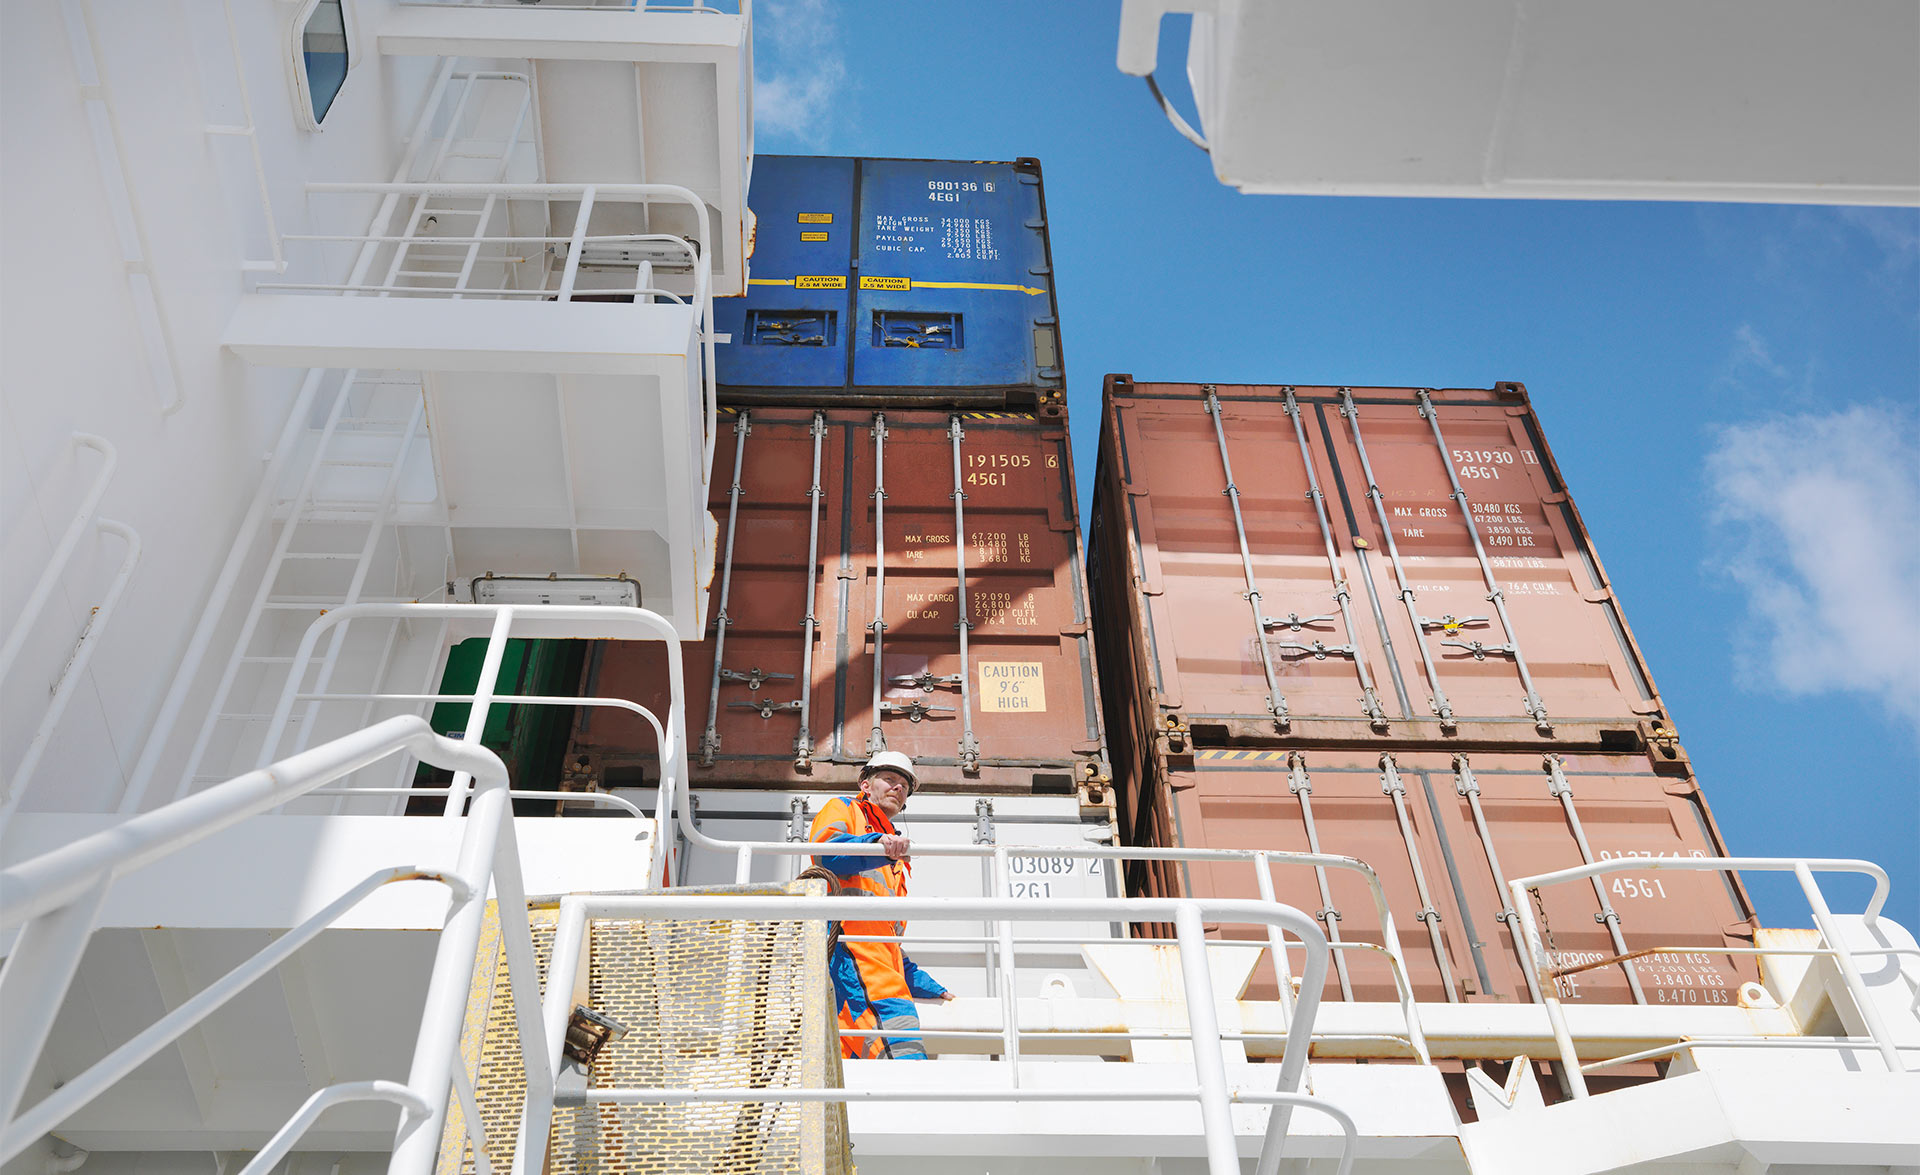 A person walks around on a cargo ship fully loaded with containers